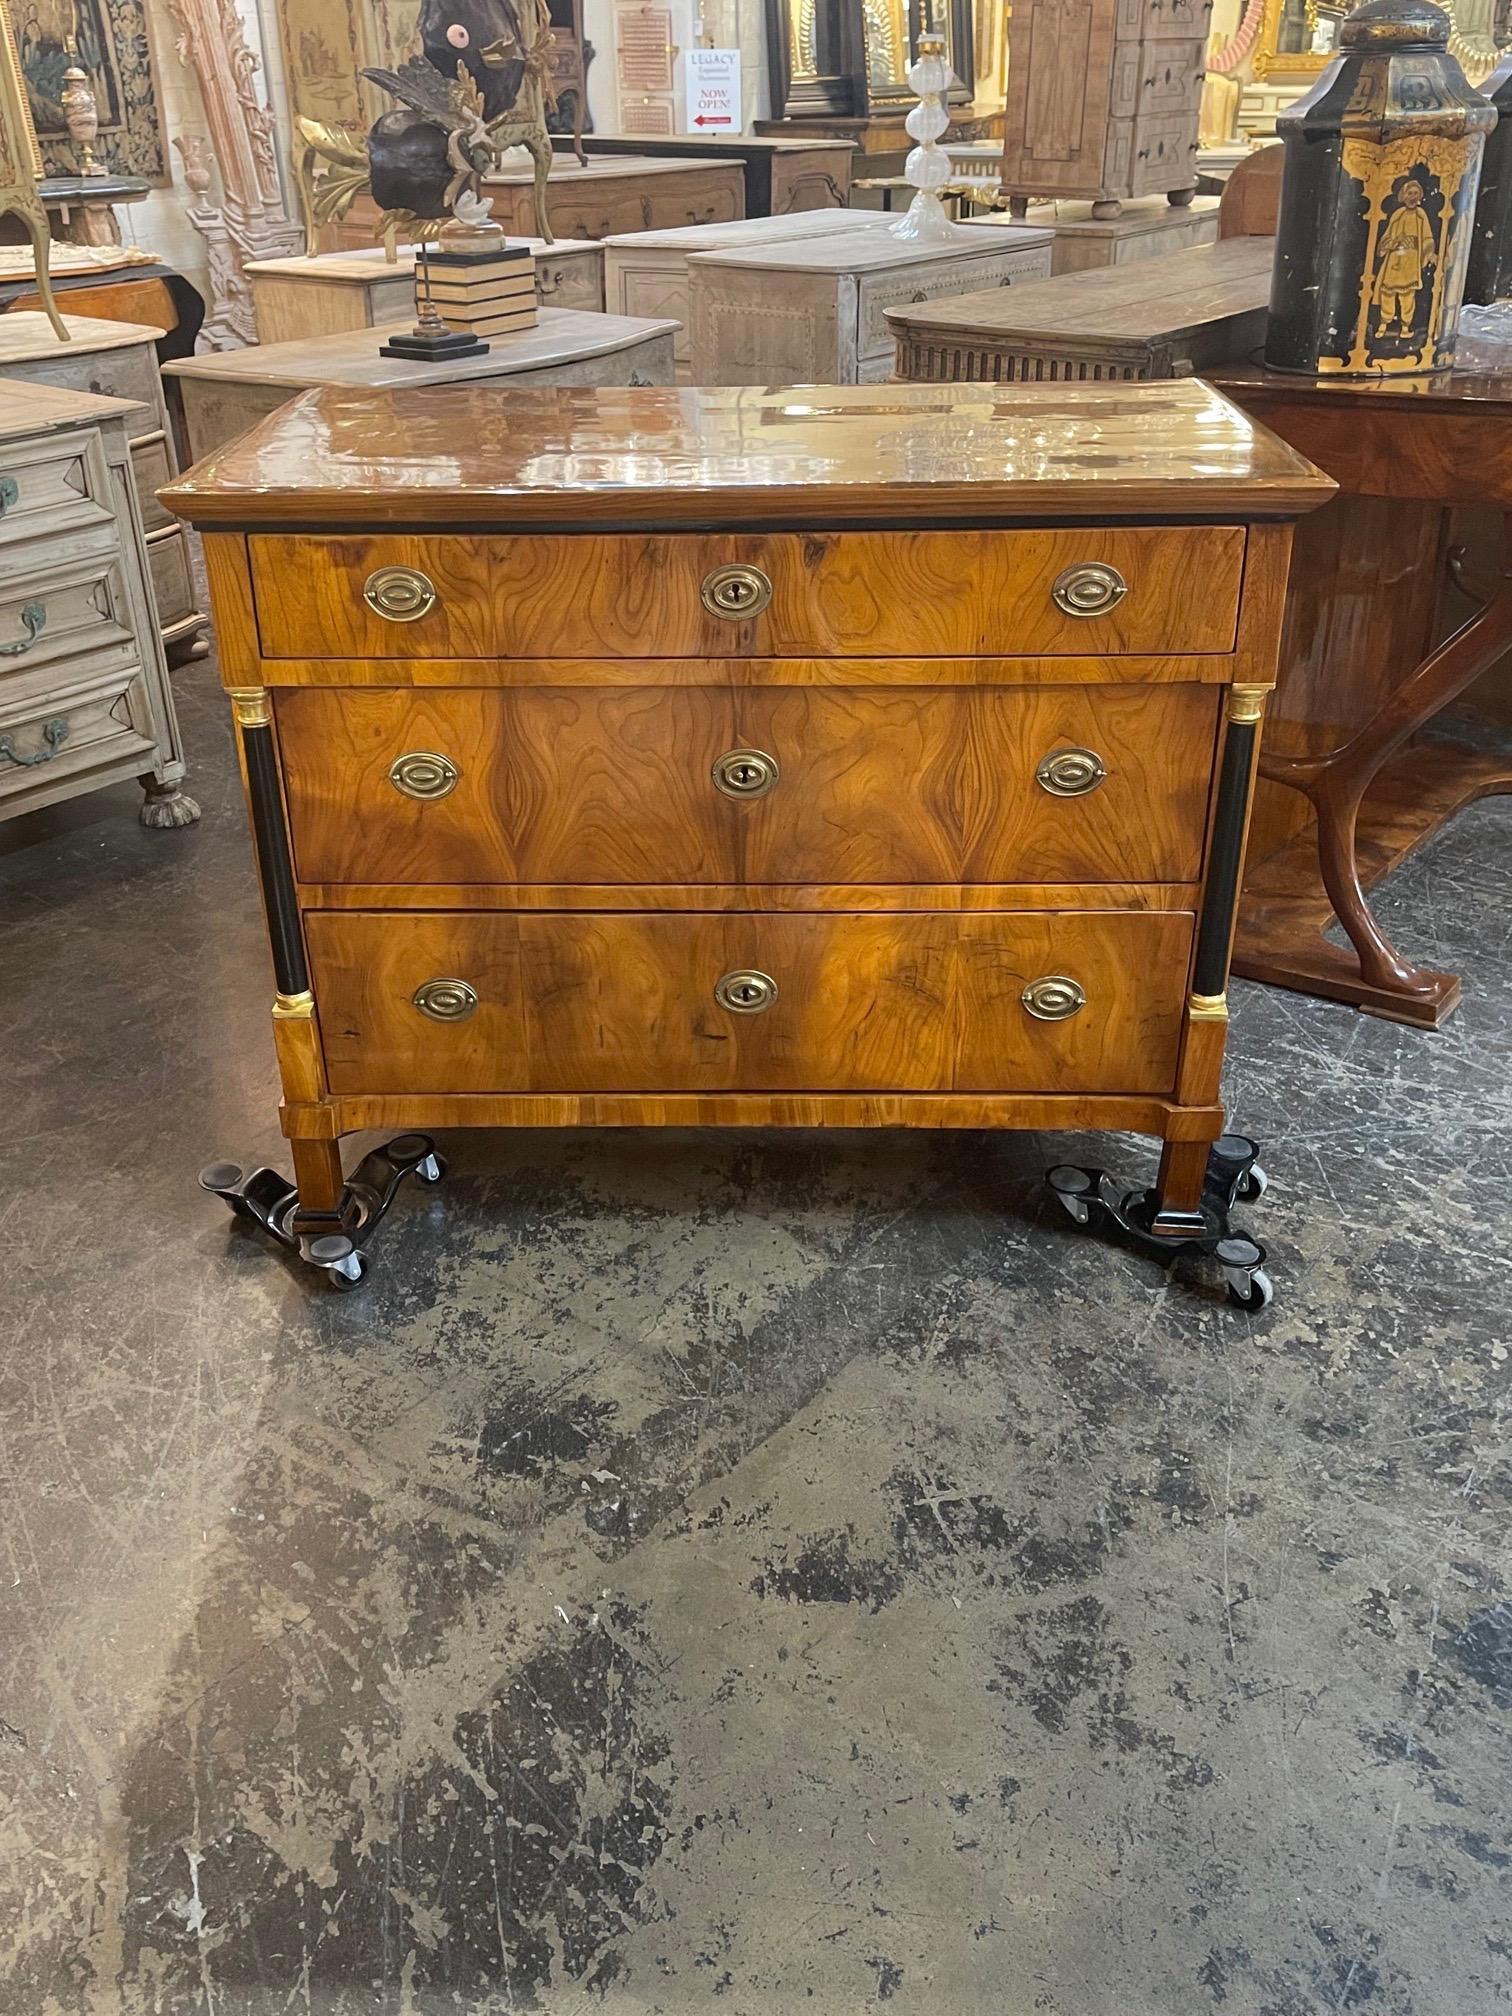 Very fine early 19th century South German walnut Biedermeier commode with modernized drawers (modern cabinet slides for smooth functioning). Beautiful details including a gorgeous finish, ebonized details and bronze hardware. Fabulous!